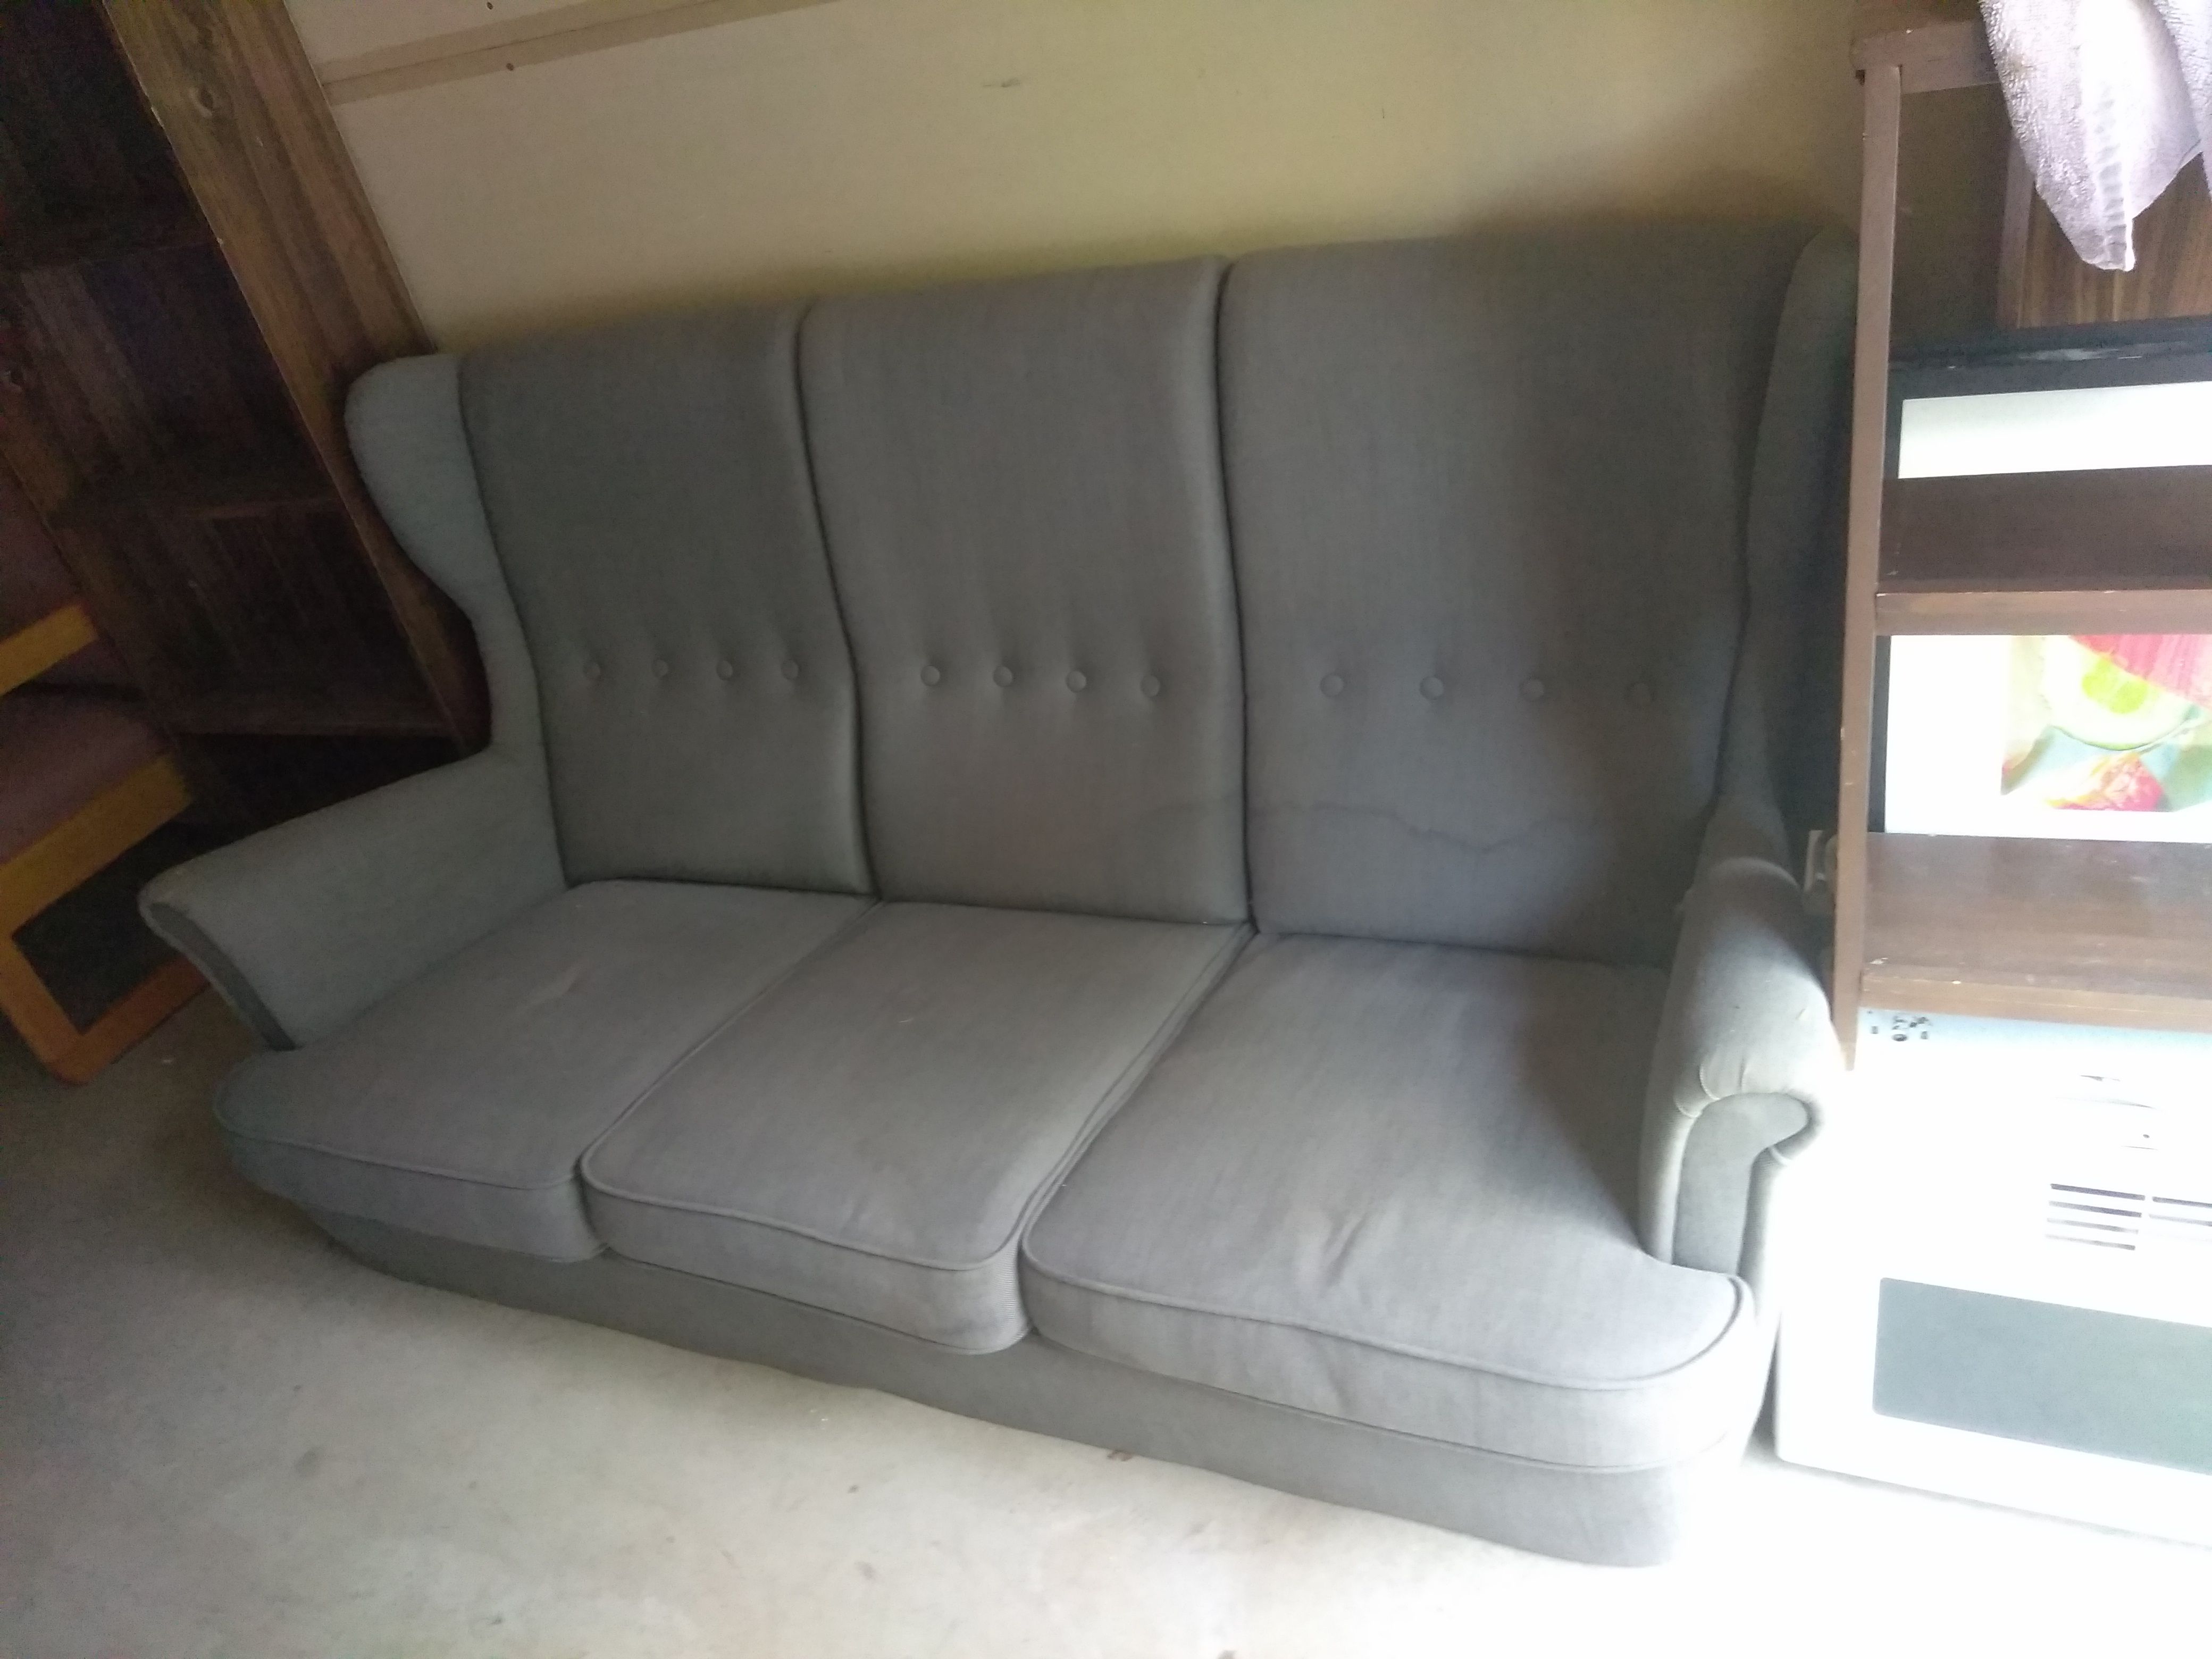 $10 couch